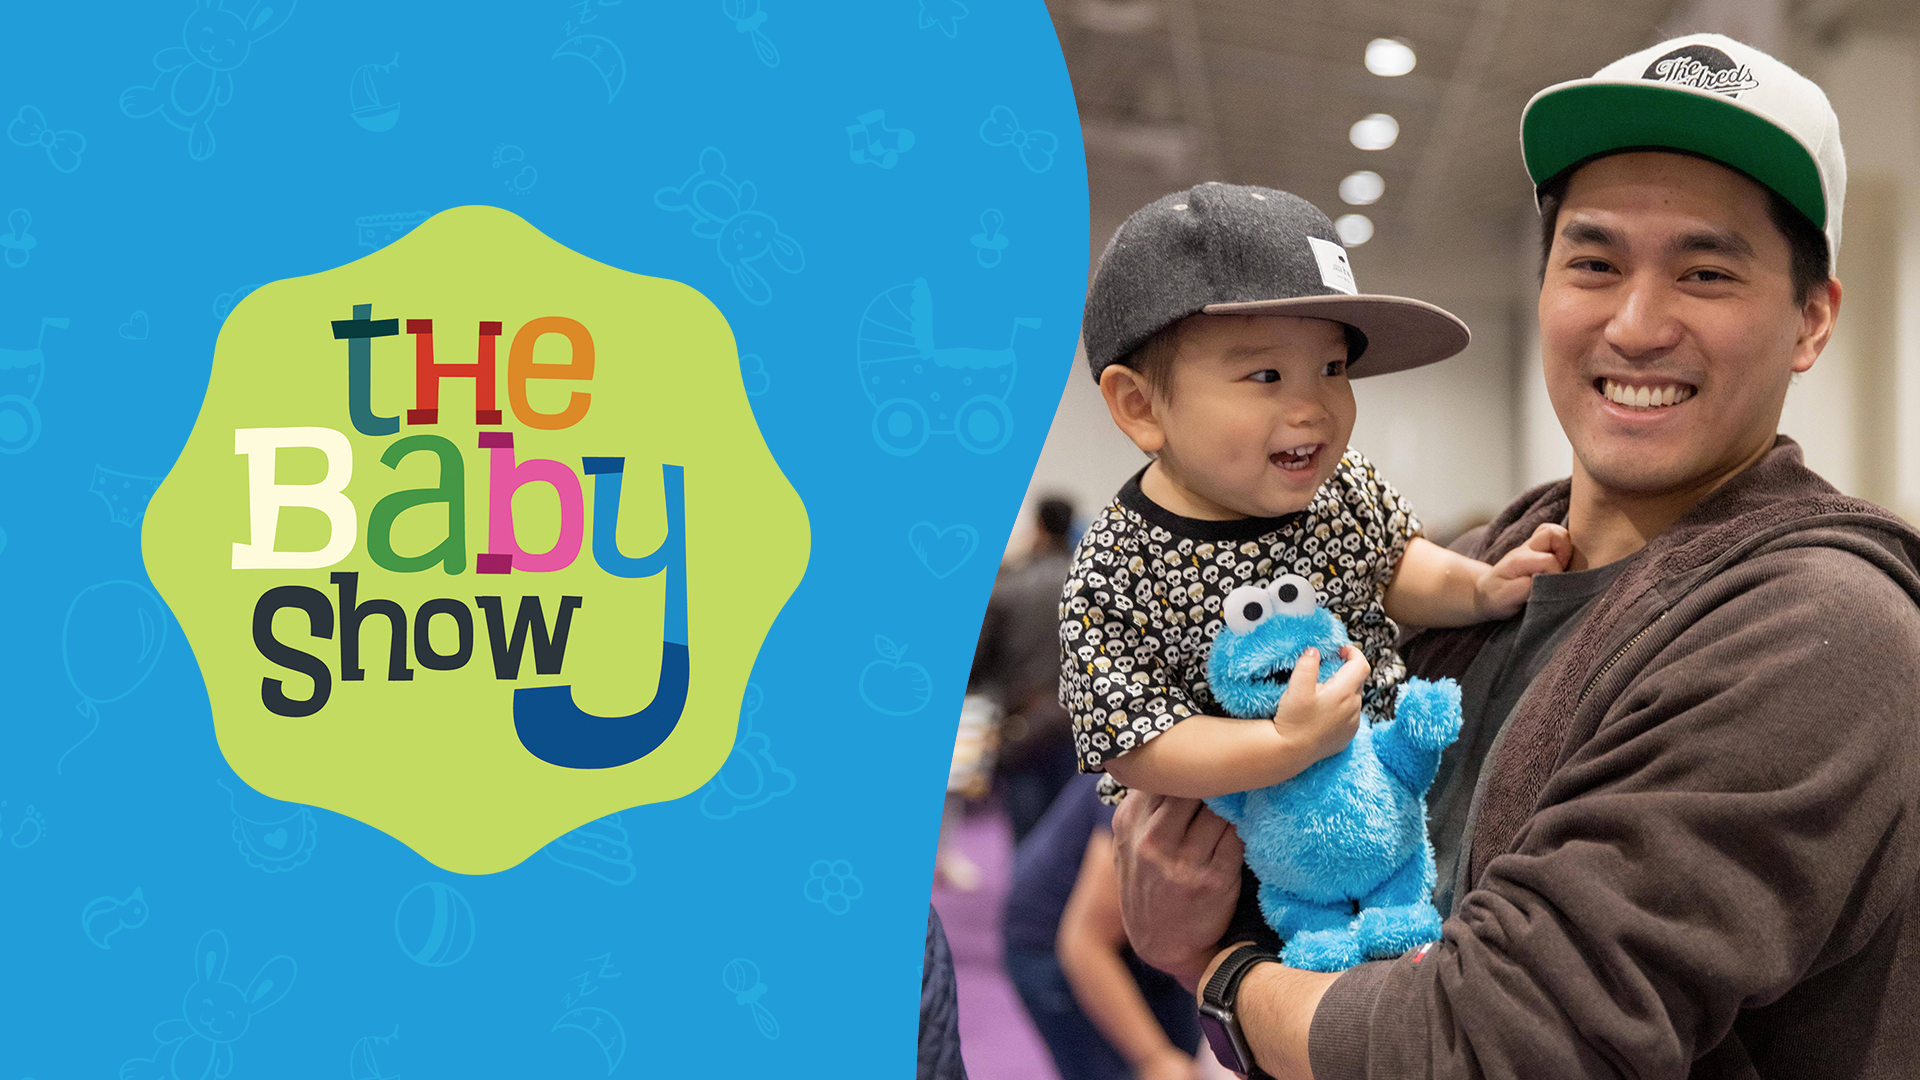 The Baby Show, Vancouver, British Columbia, Canada